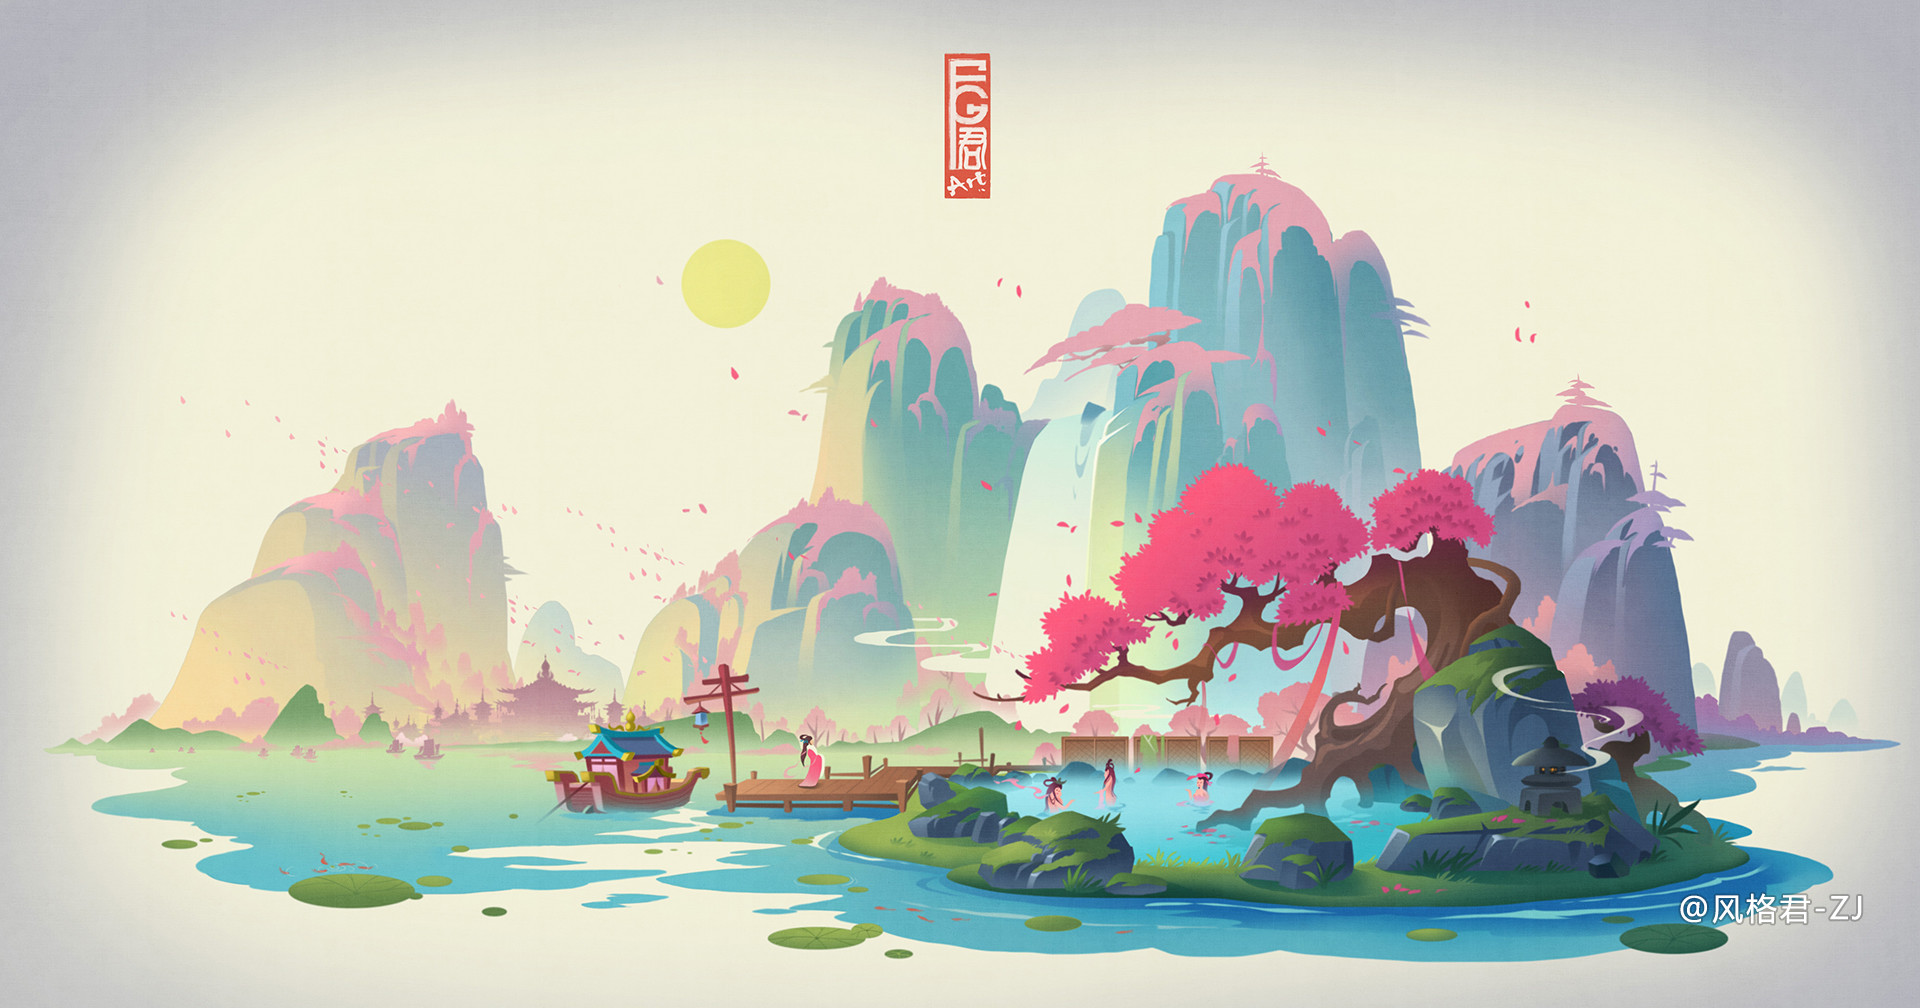 Jun Zhang Asian Architecture White Background Digital Art Cherry Blossom Hot Spring Mountains Boat 1920x1008